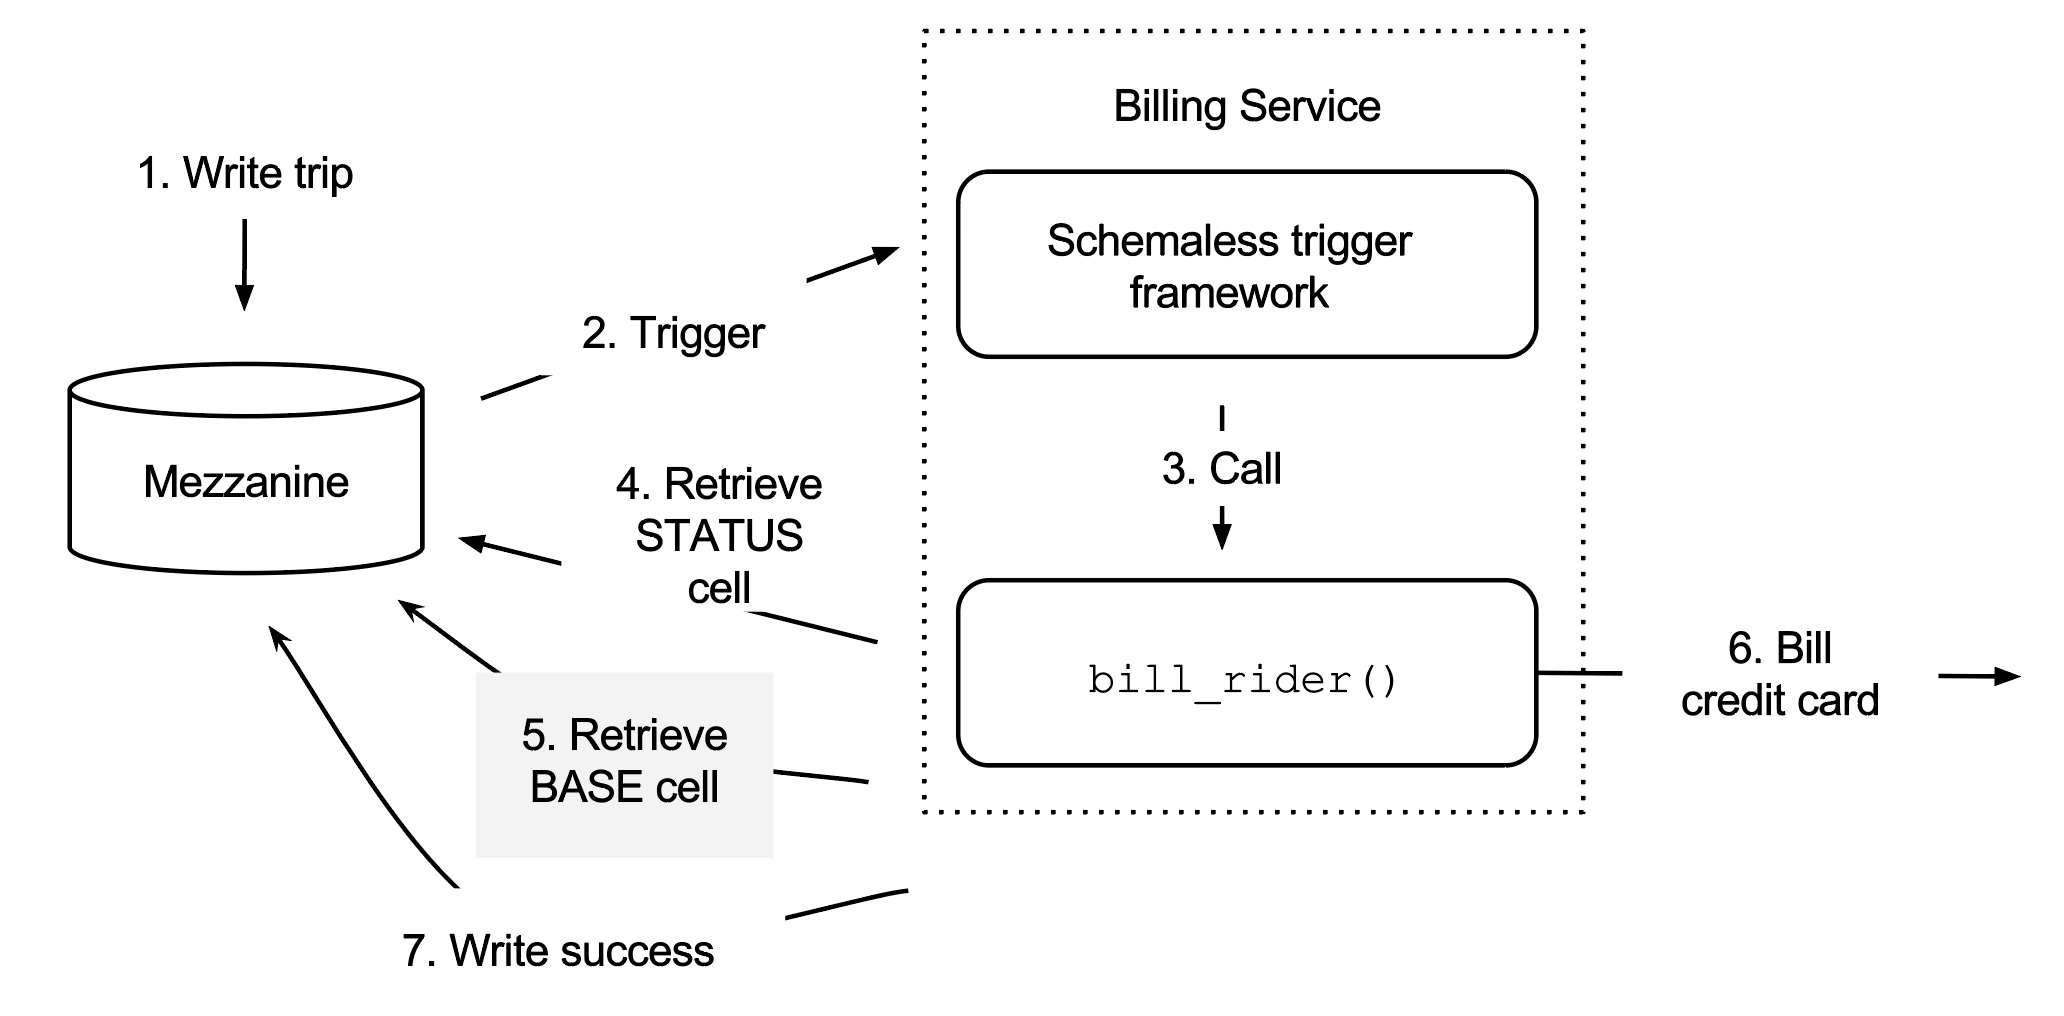 Flow of information for the bill_rider trigger function